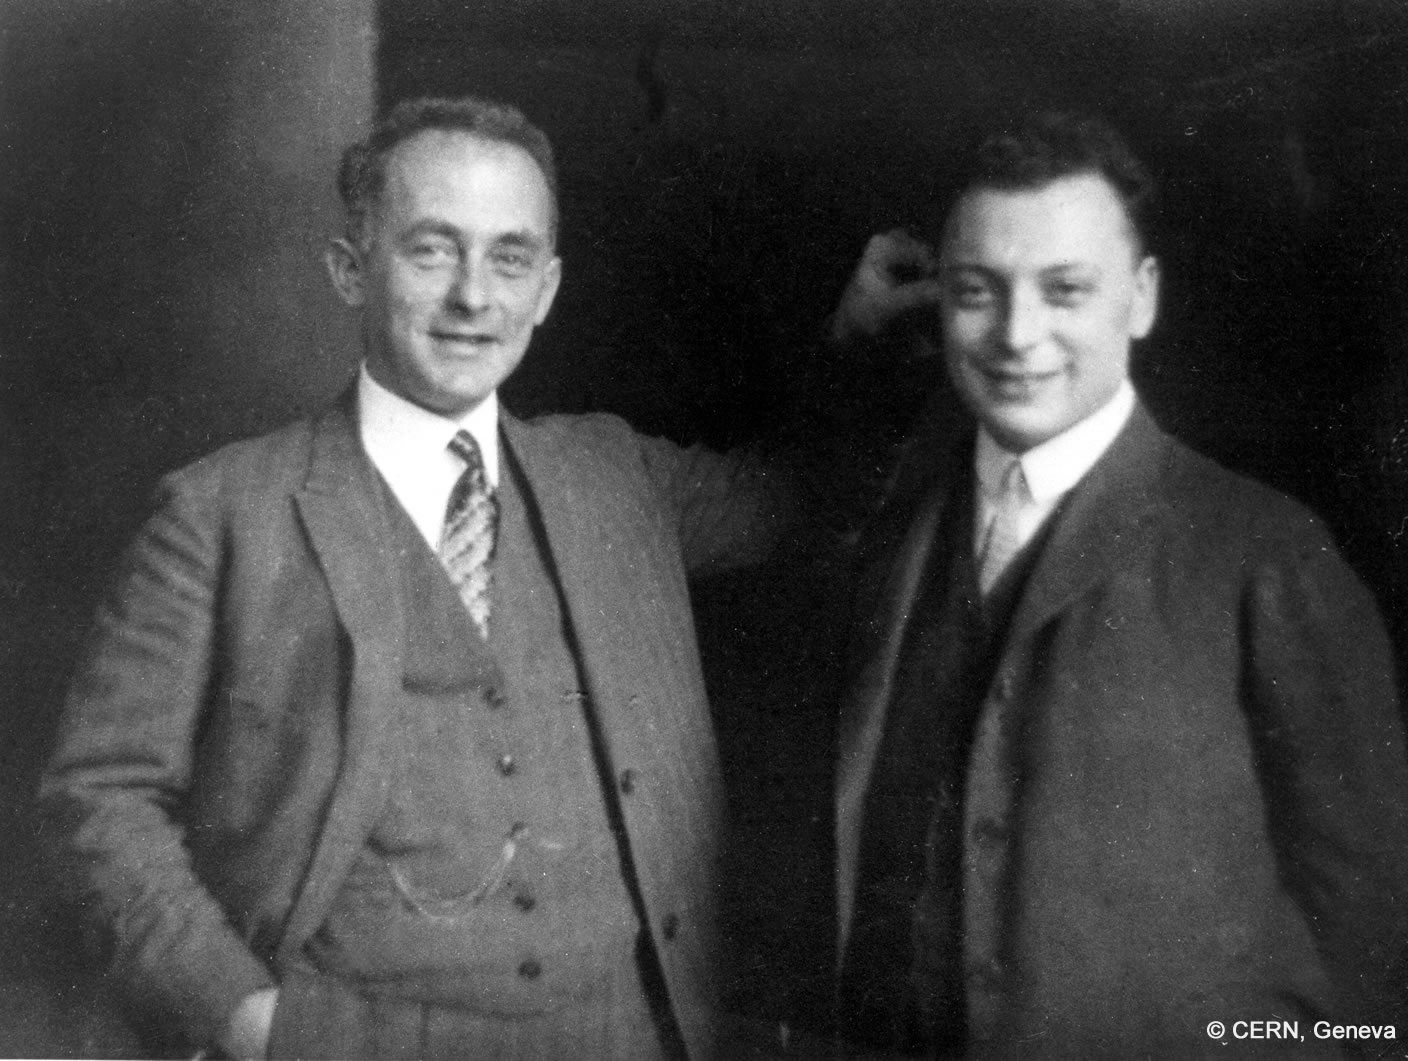 Wolfgang Pauli stands to the right of Max Born, who holds him by the ear